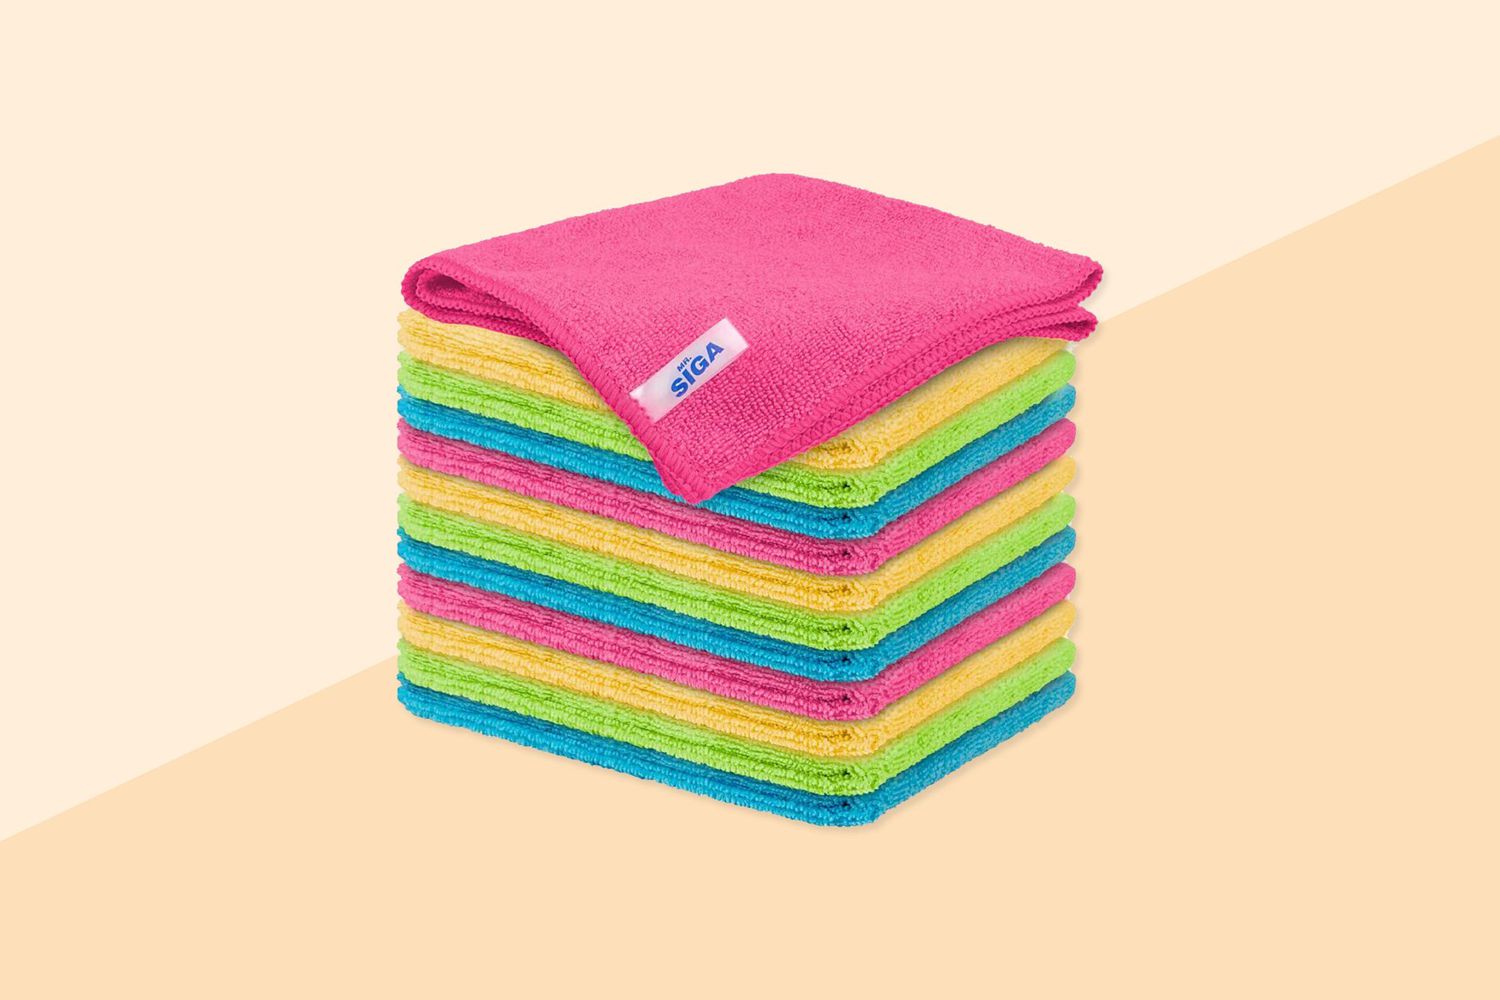 Simple Houseware 16 X 24 Inches Microfiber Thick Cleaning Towel Cloth 